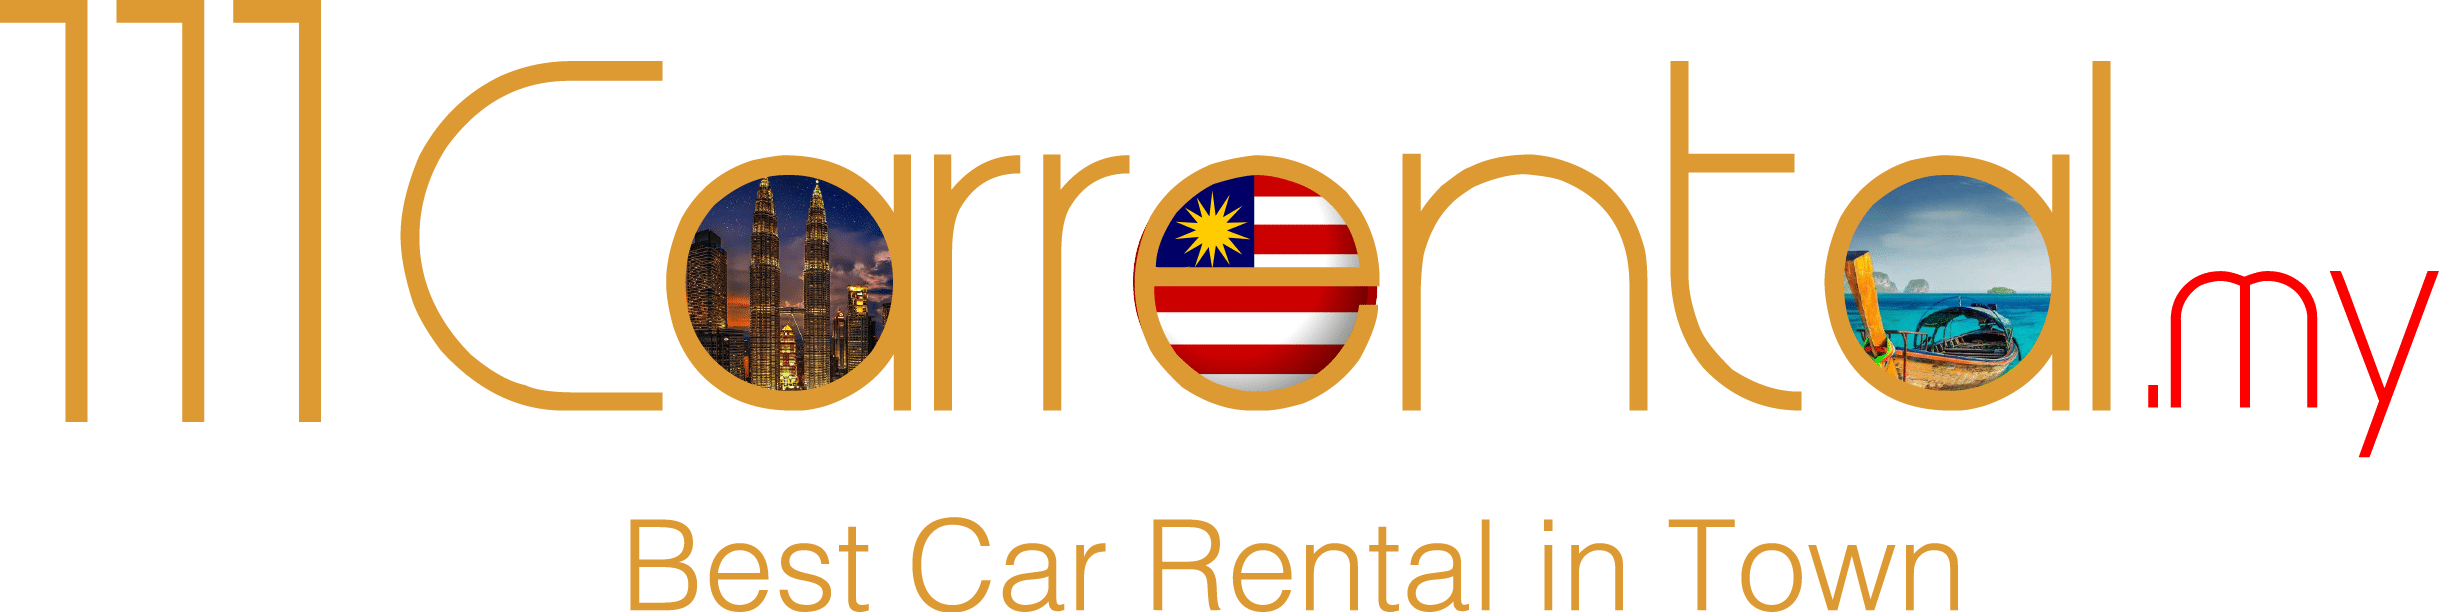 111 Car Rental | Windscreen, Glass and Tires Protection - 111 Car Rental